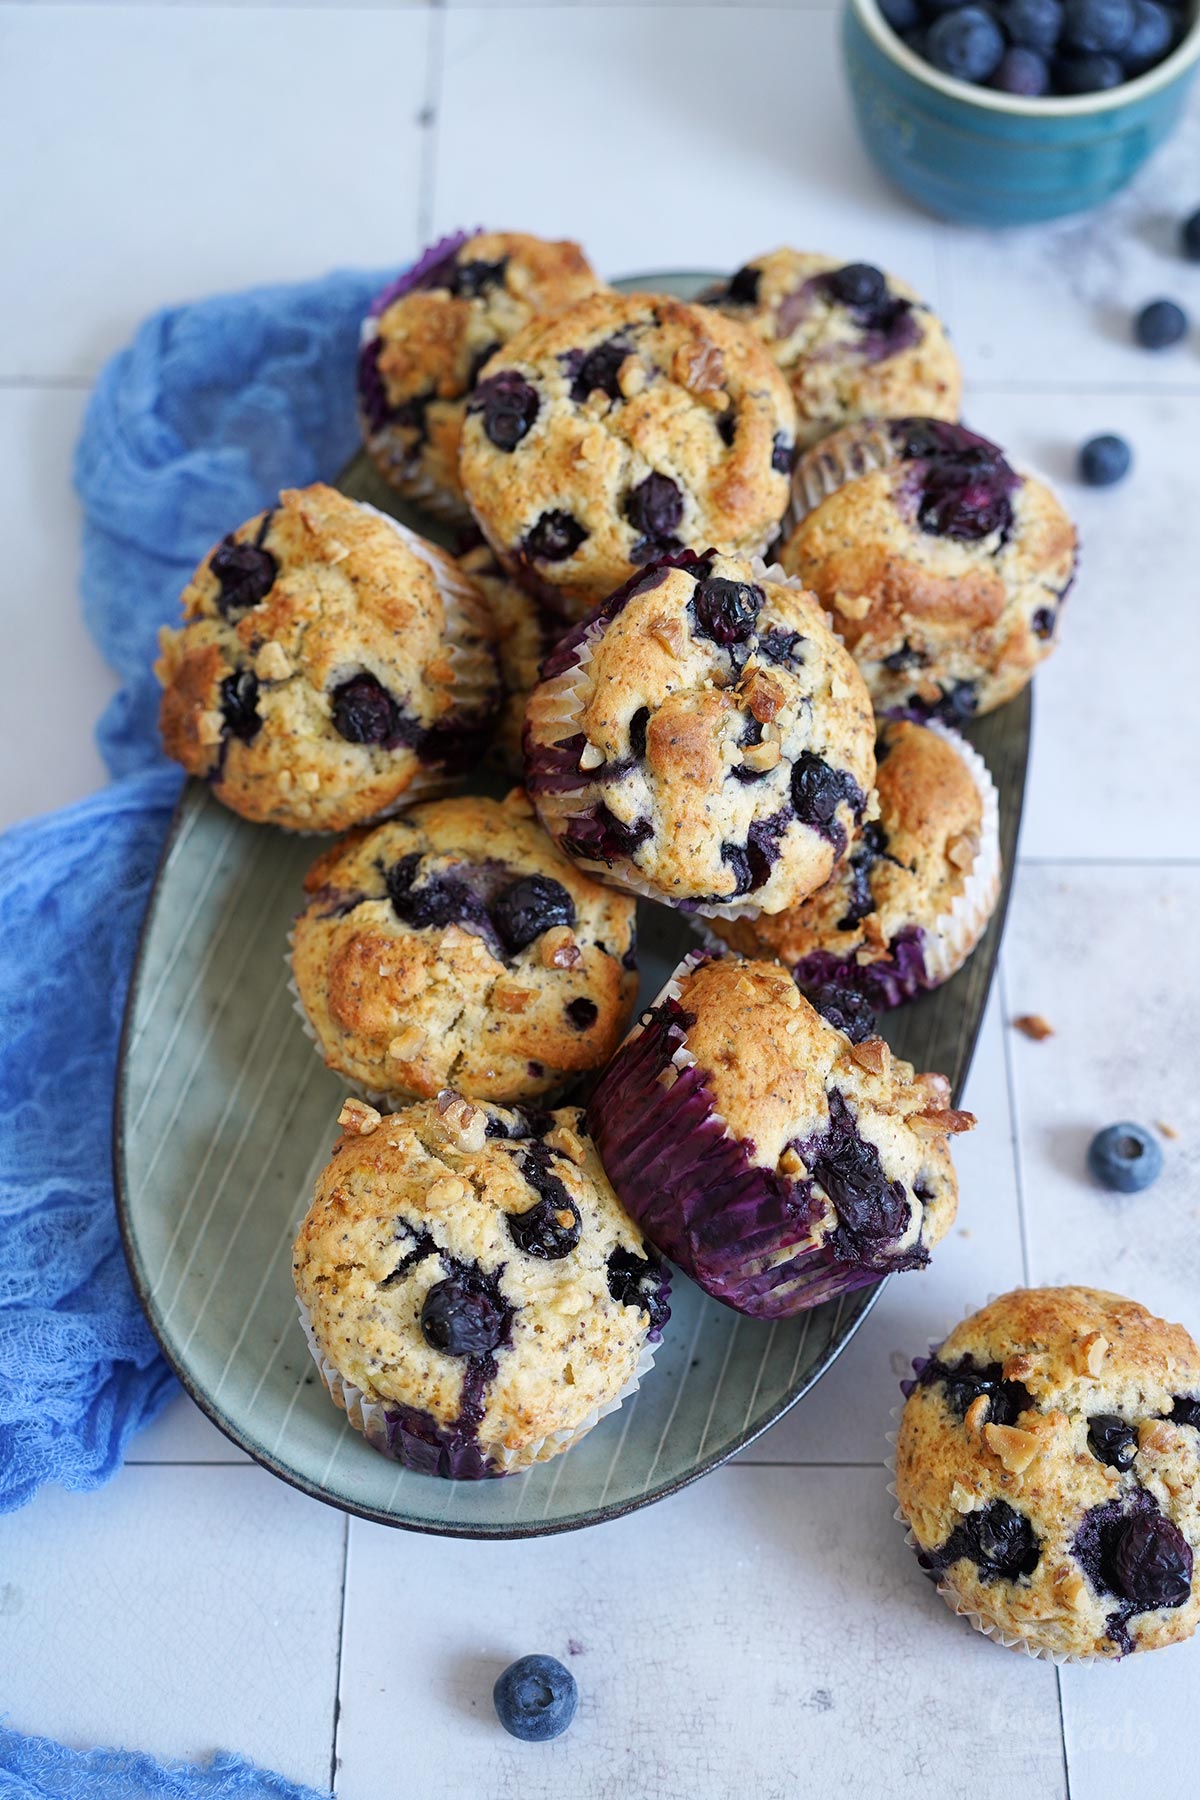 Blueberry Banana Poppy Seed Muffins | Bake to the roots